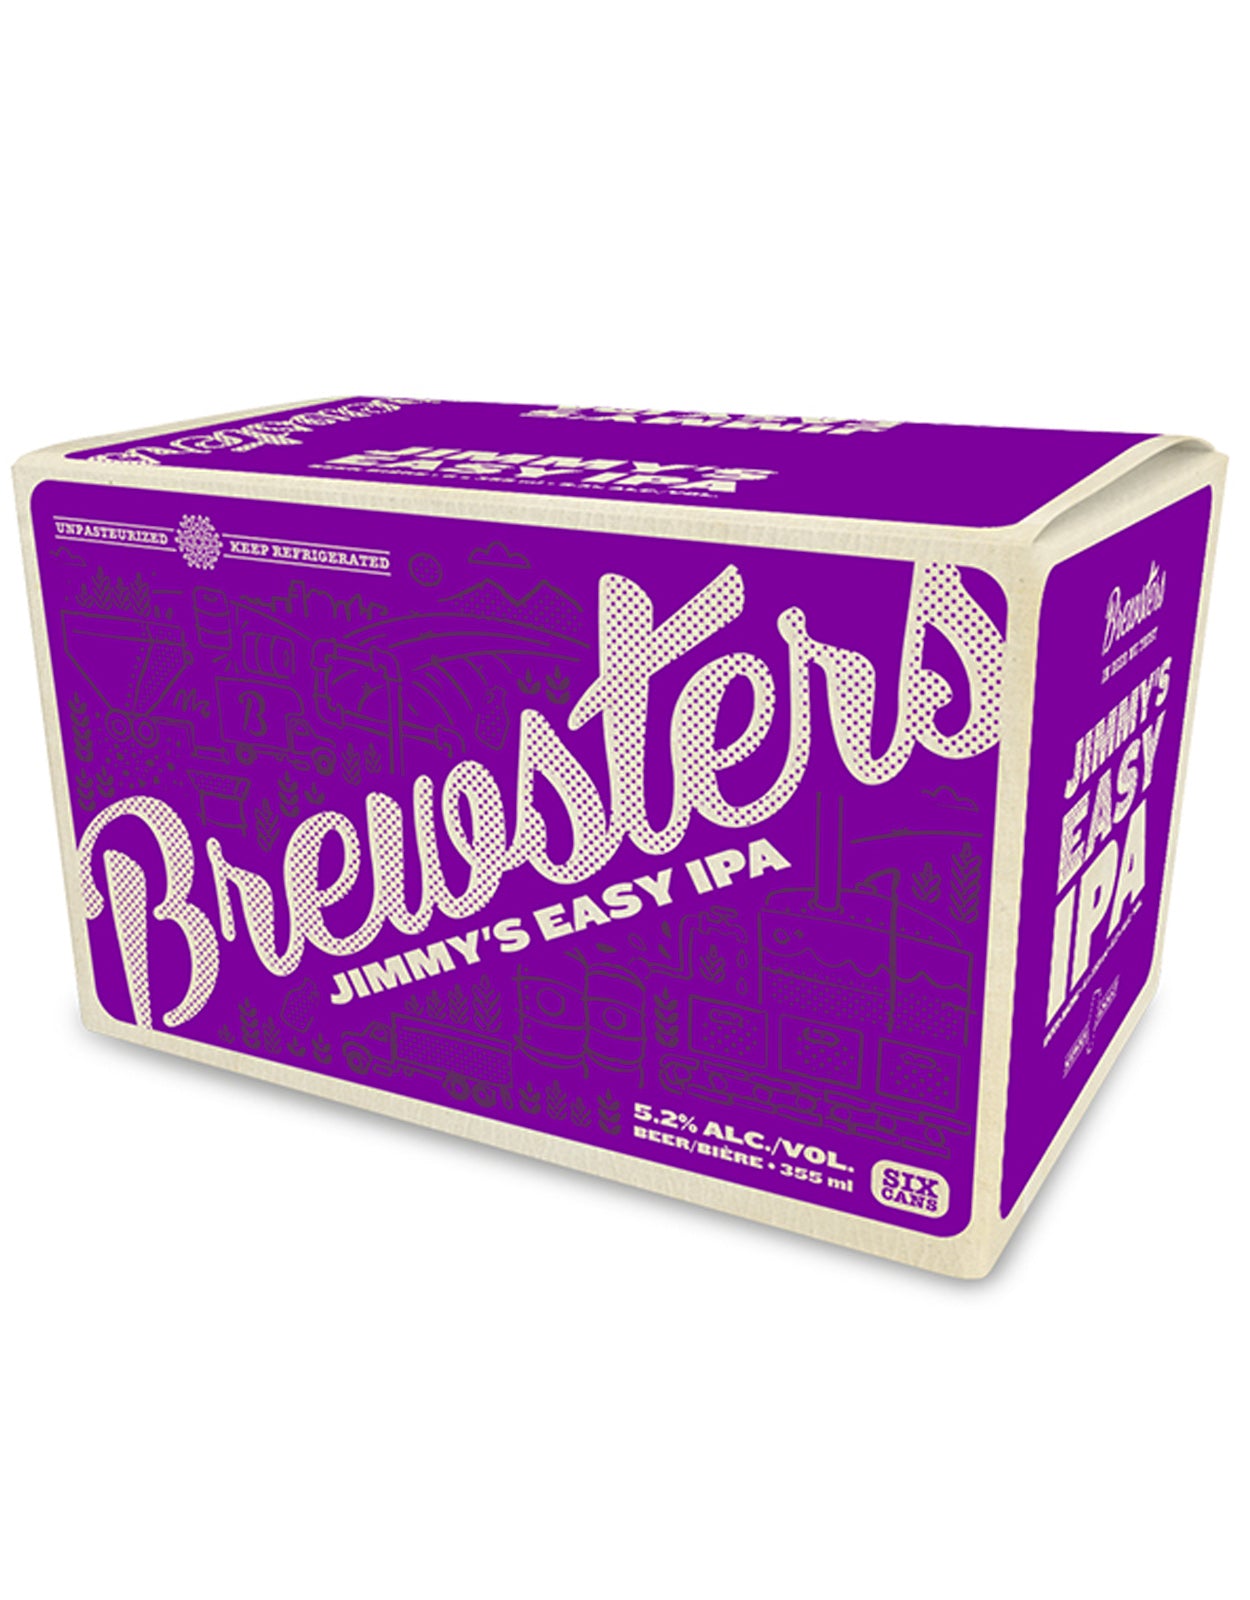 Brewsters Jimmy's Easy IPA 355 ml - 24 Cans